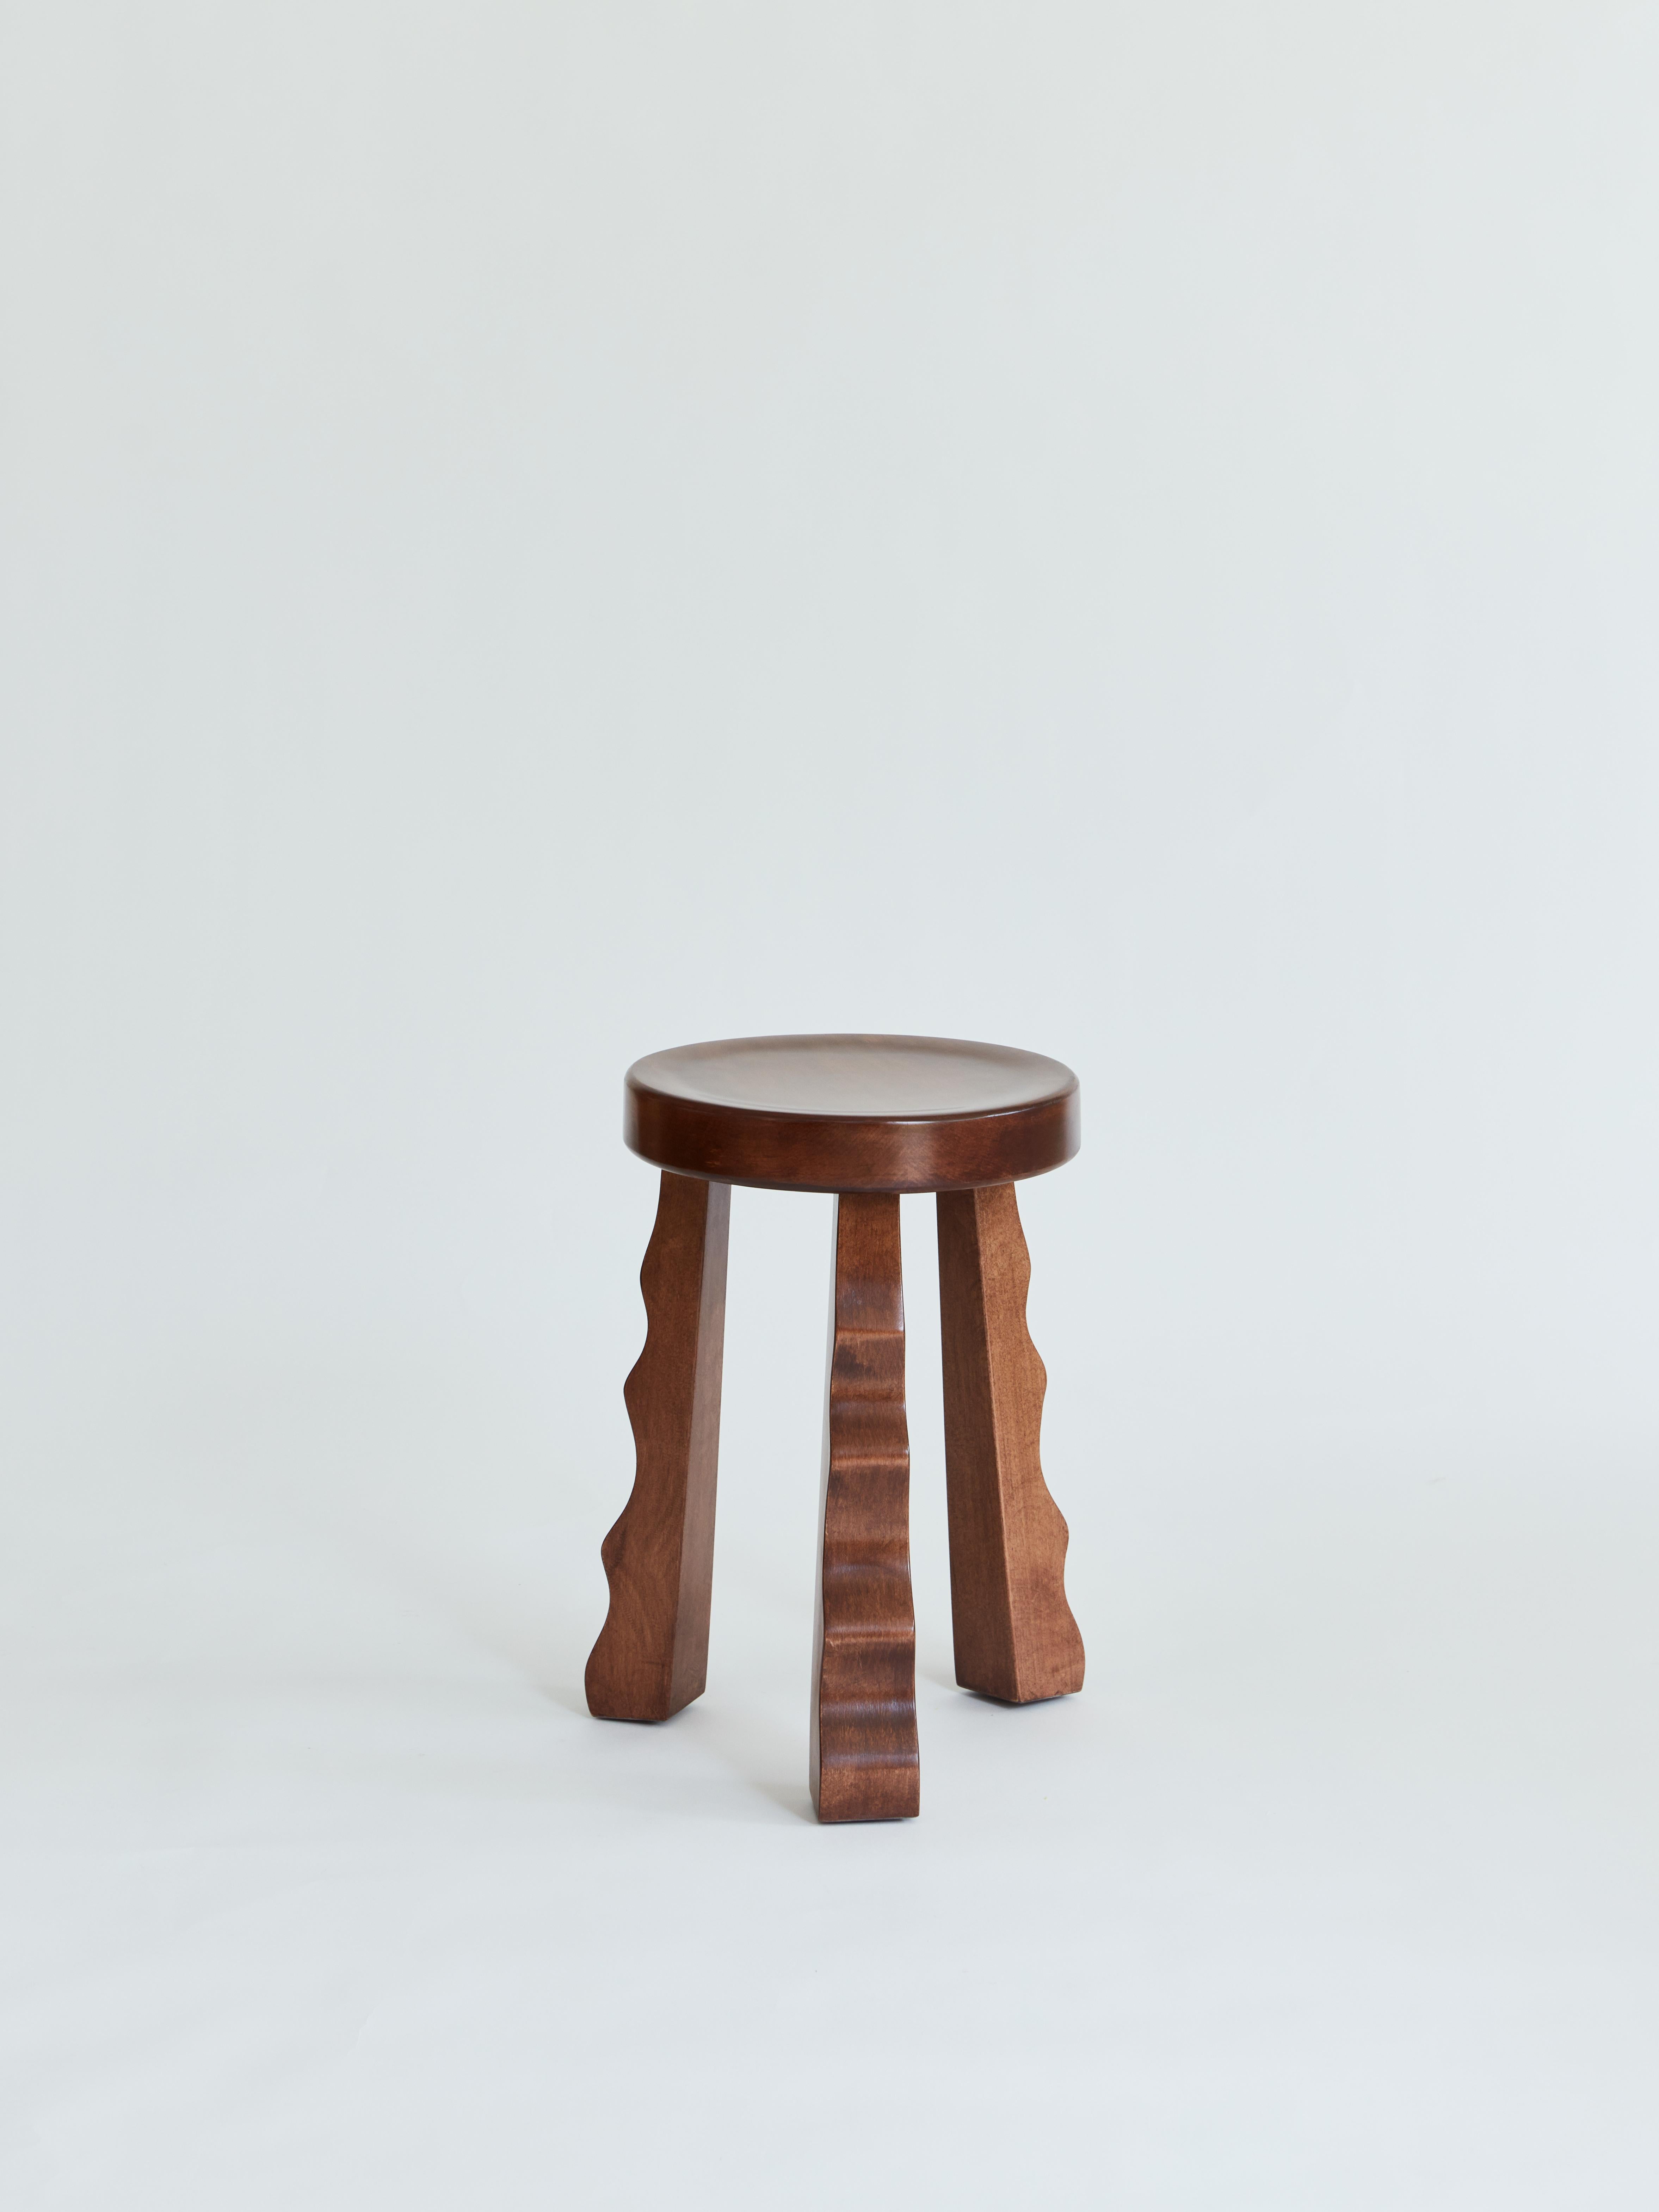 Made to order wood stool designed by Christian Siriano.

Red oak 

Measure: Seat width: 12”.
 